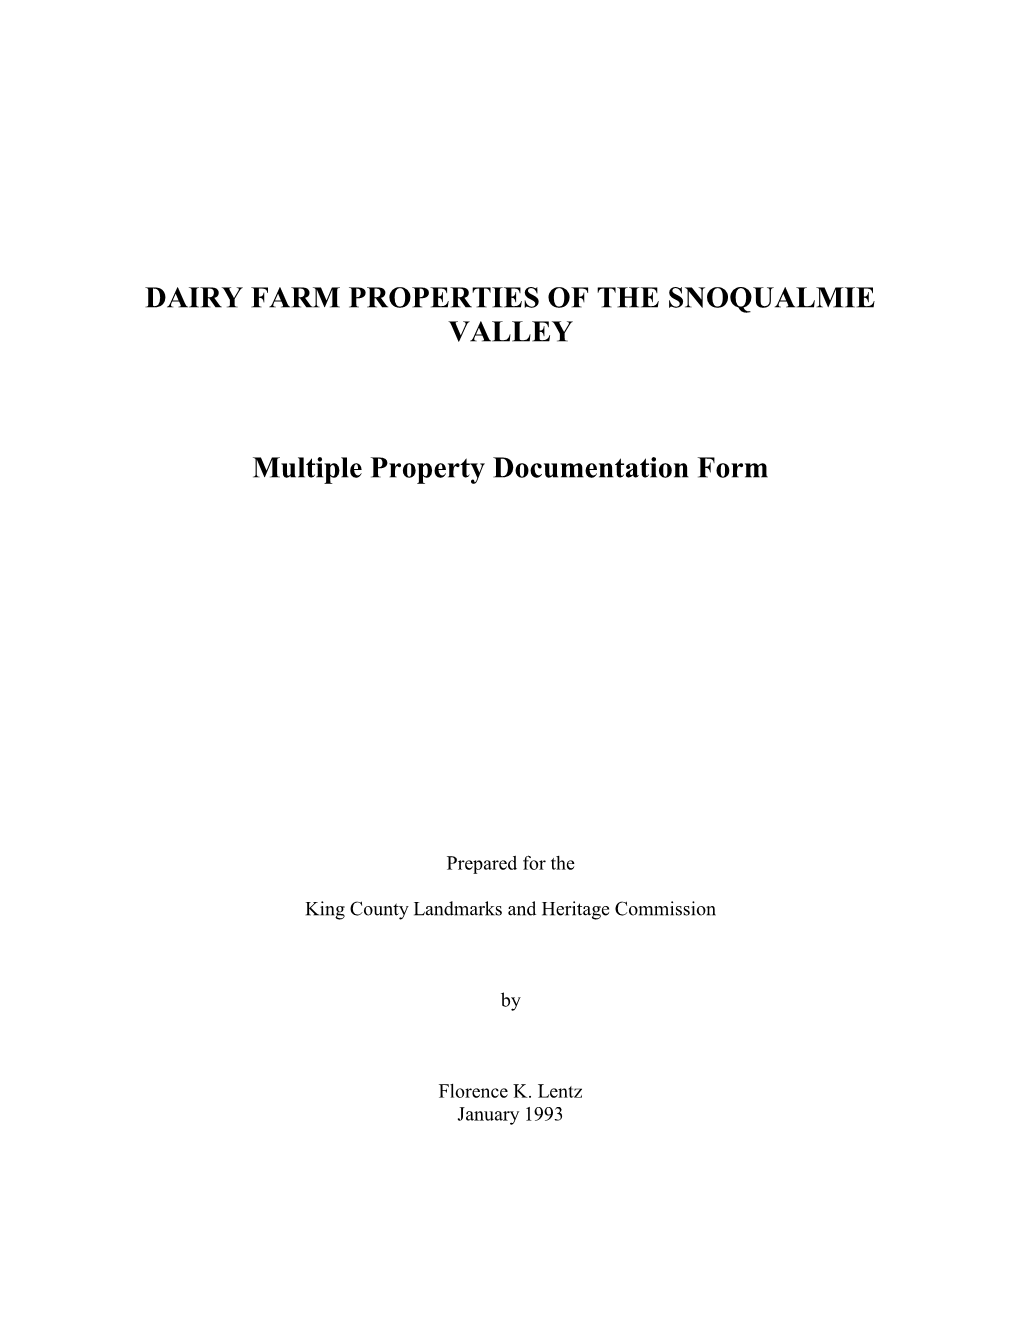 DAIRY FARM PROPERTIES of the SNOQUALMIE VALLEY Multiple Property Documentation Form